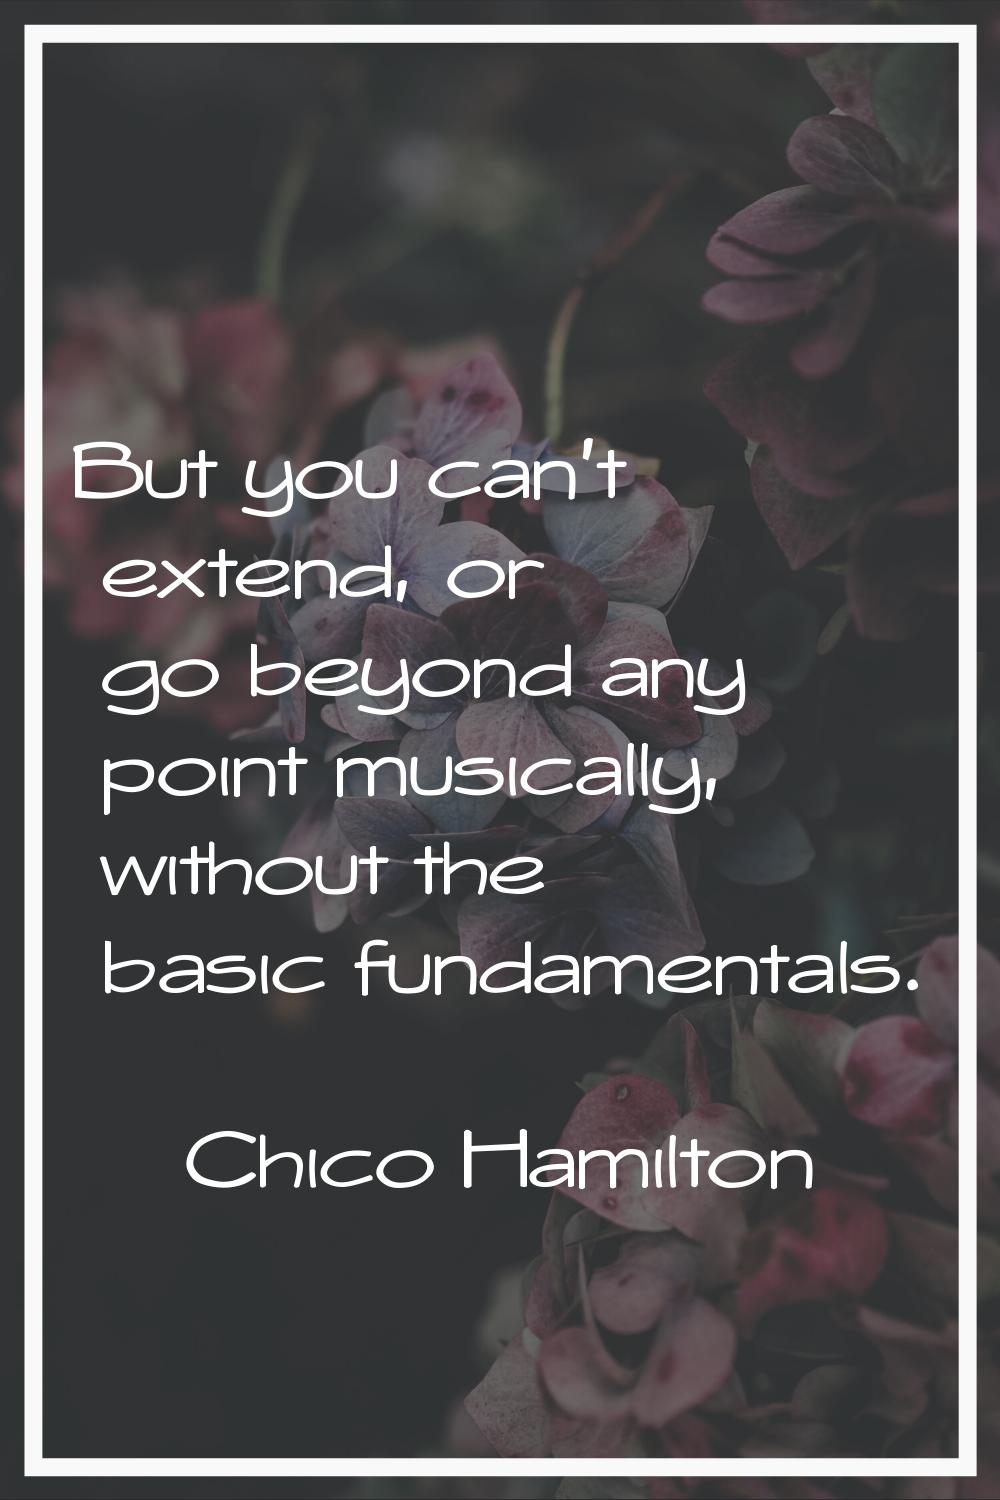 But you can't extend, or go beyond any point musically, without the basic fundamentals.